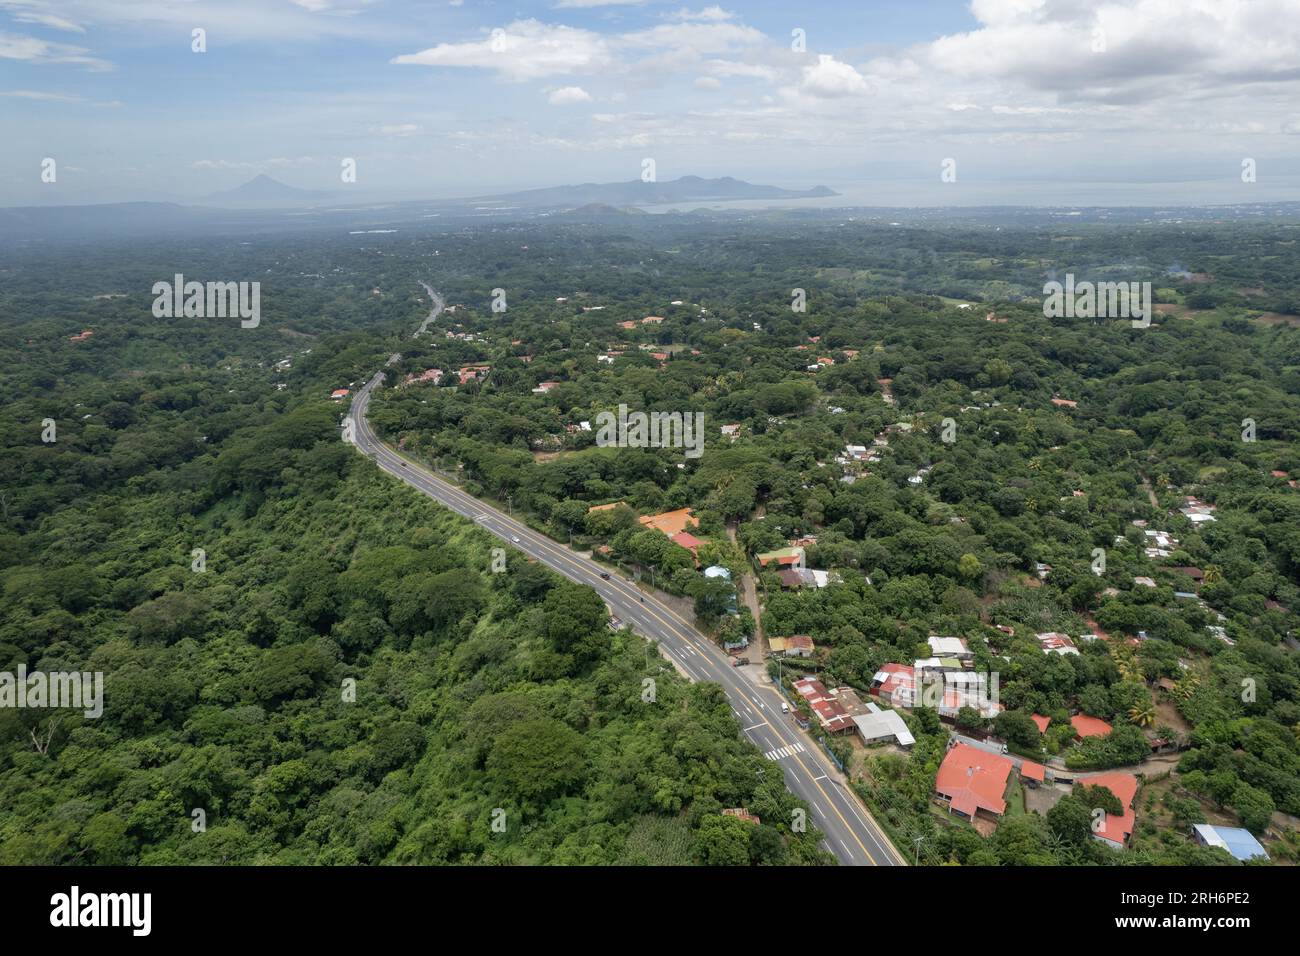 Nicaragua central america landscape aerial drone view on bright sunny day Stock Photo